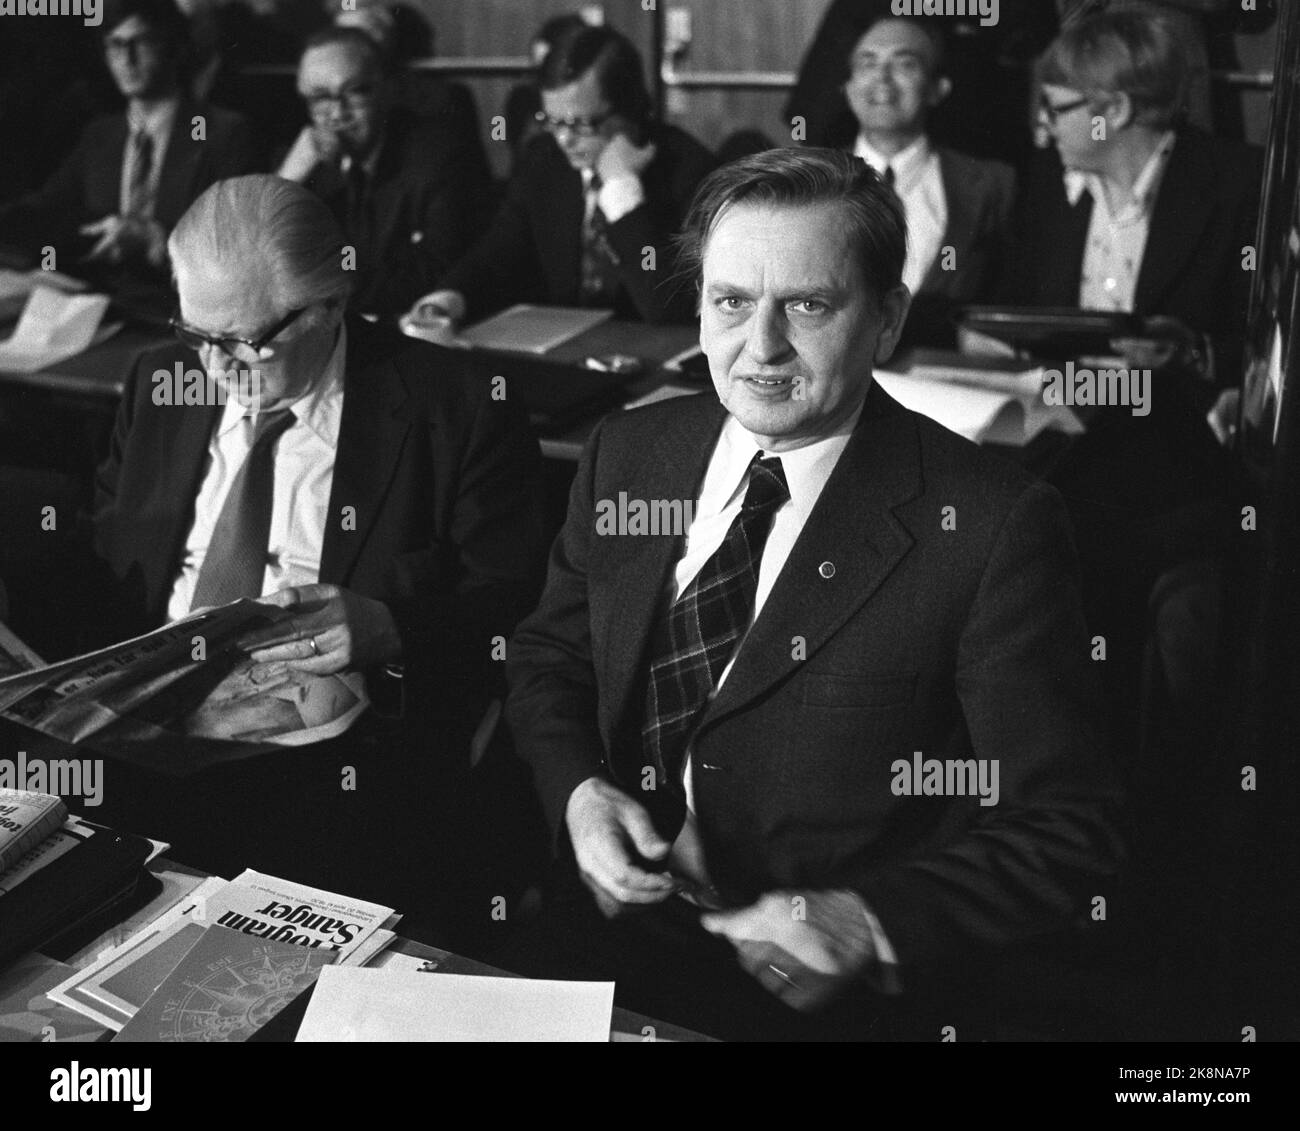 Oslo April 20, 1975. The Labor Party's national meeting. Here, Swedish Prime Minister Olof Palme. Photo: Henrik Laurvik / NTB Stock Photo